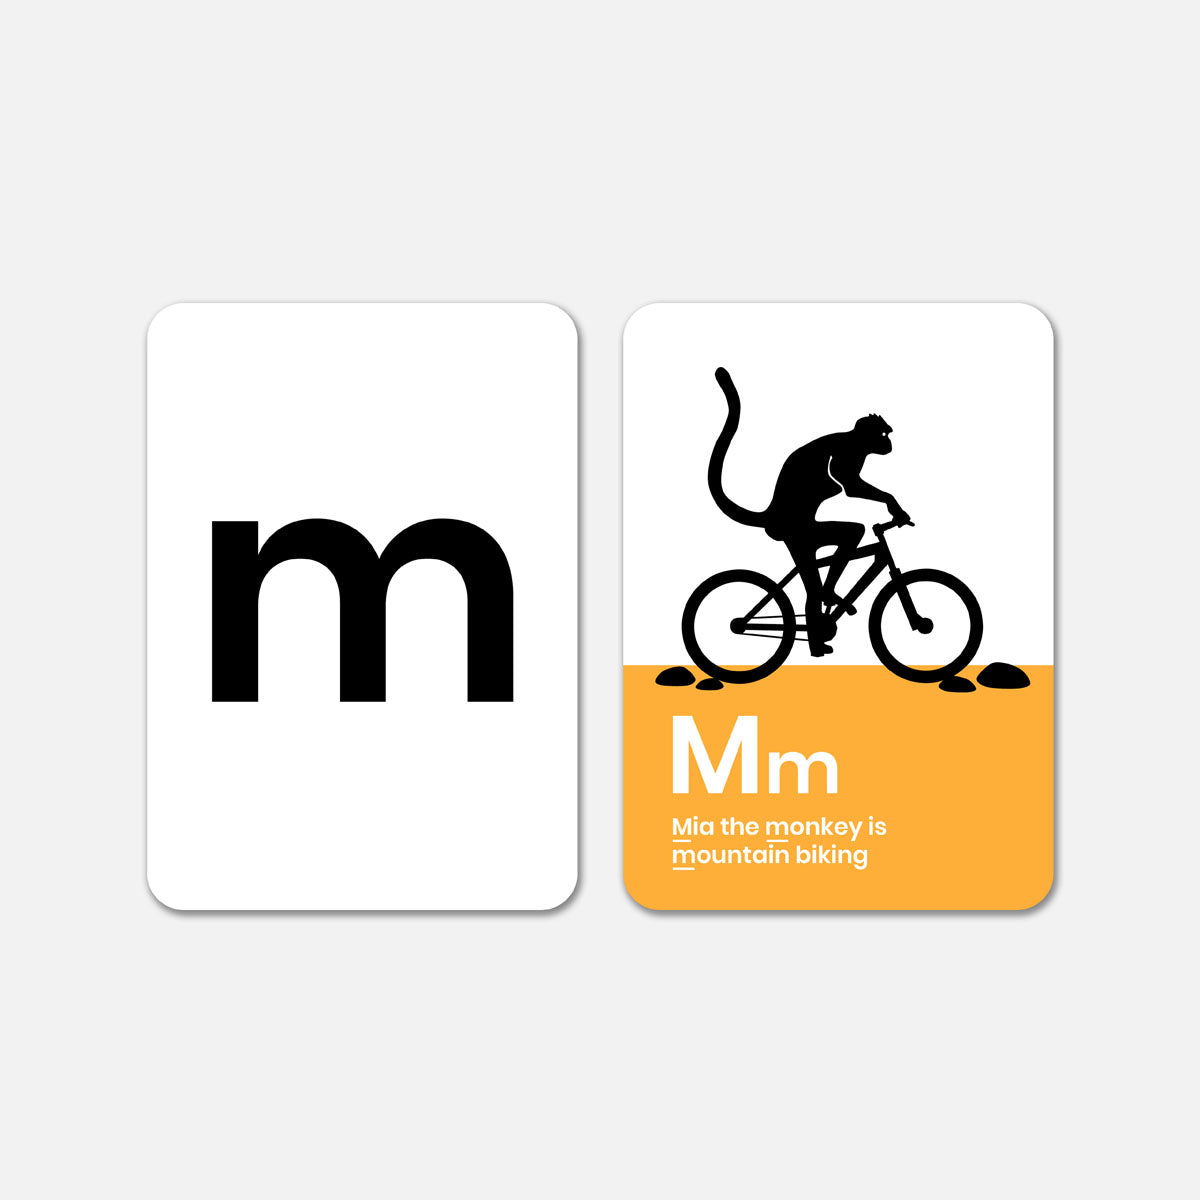 The M card seen from both sides. The one on the left is the plain white card with a black letter m and on the right is a white and orange graphic with a monkey riding a bicycle.